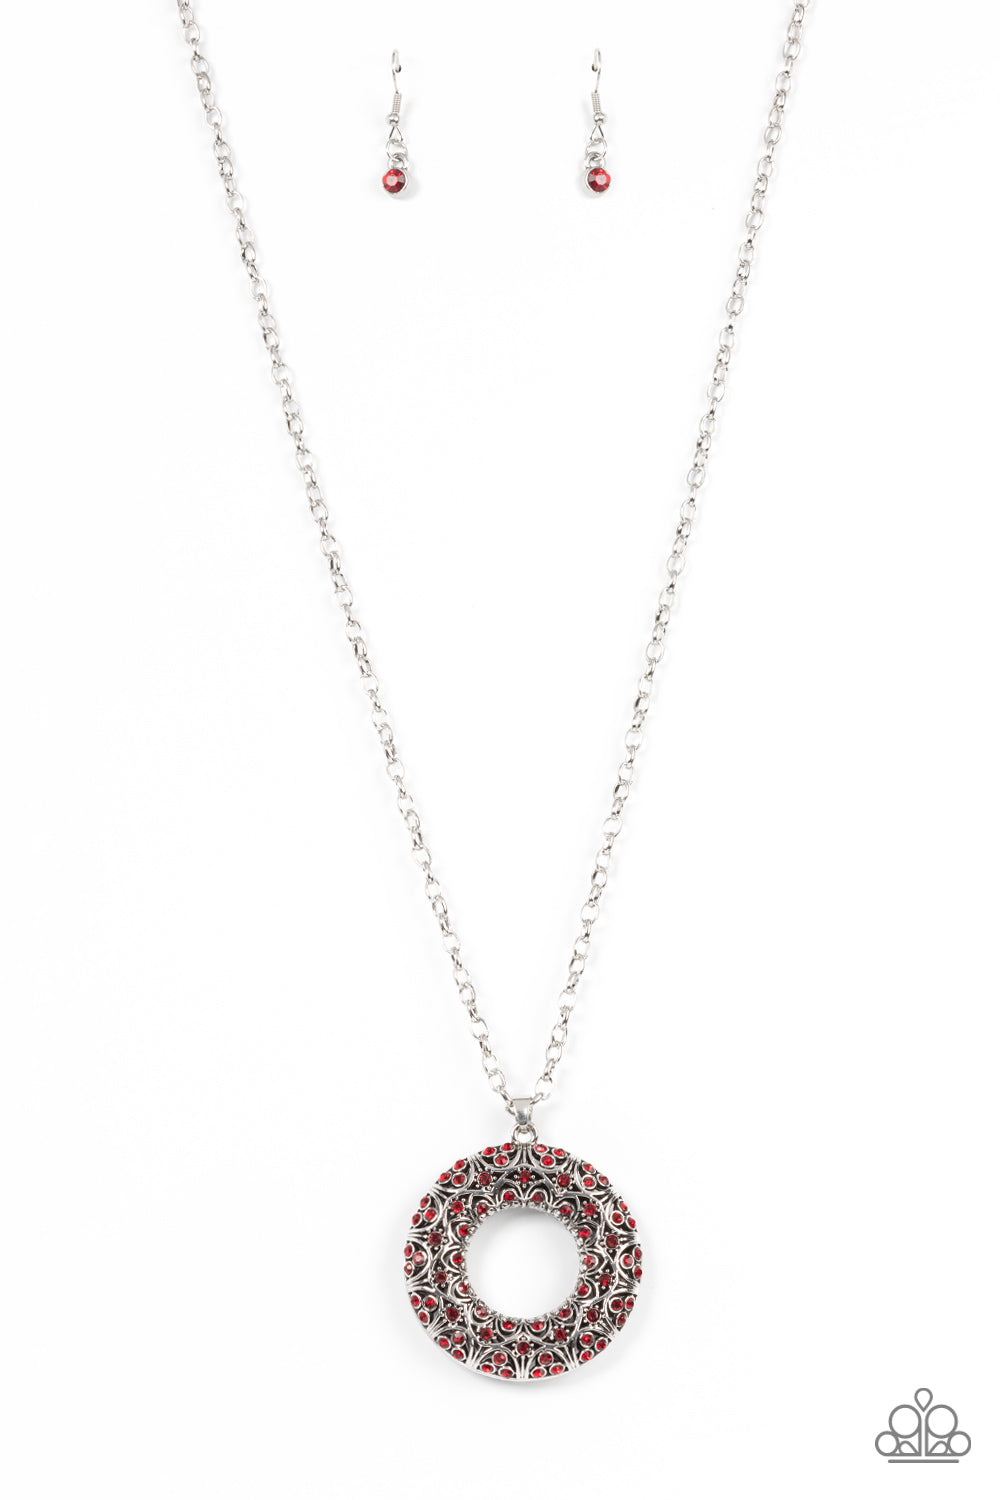 Wintry Wreath - red - Paparazzi necklace